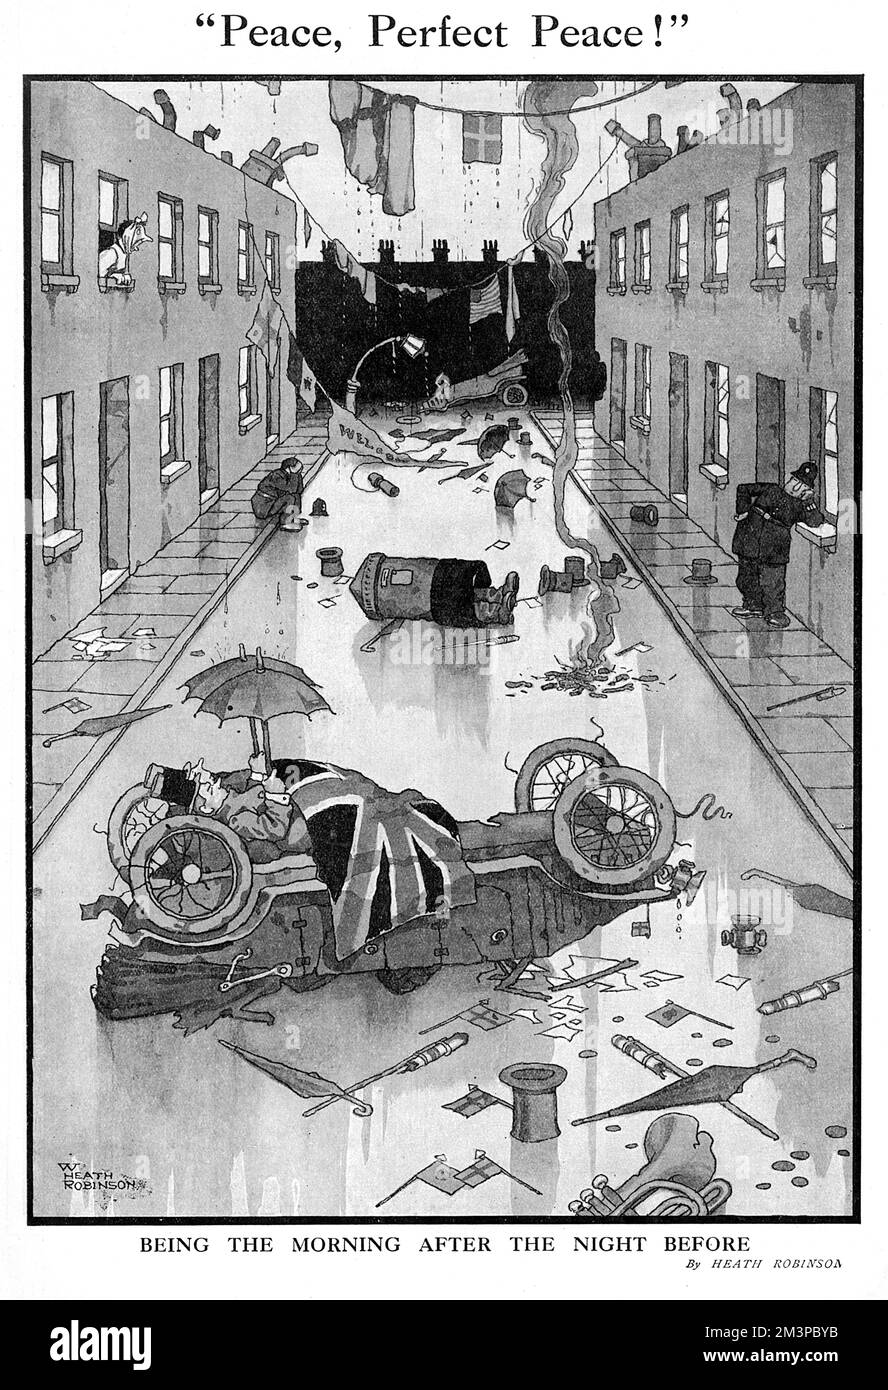 Peace, Perfect Peace by Heath Robinson. Being the Morning after the Night Before.  The aftermath of energetic peace celebrations to mark the end of the First World War, Heath Robinson imagines a street strewn with fallen flags and banners, somebody comatose in a letter box and a couple fast asleep on an upturned car, with umbrellas up to shelter from the drizzle, warm under a Union Jack flag. Ever a police officer has stopped for a doze on a convenient windowsill.       Date: 1919 Stock Photo